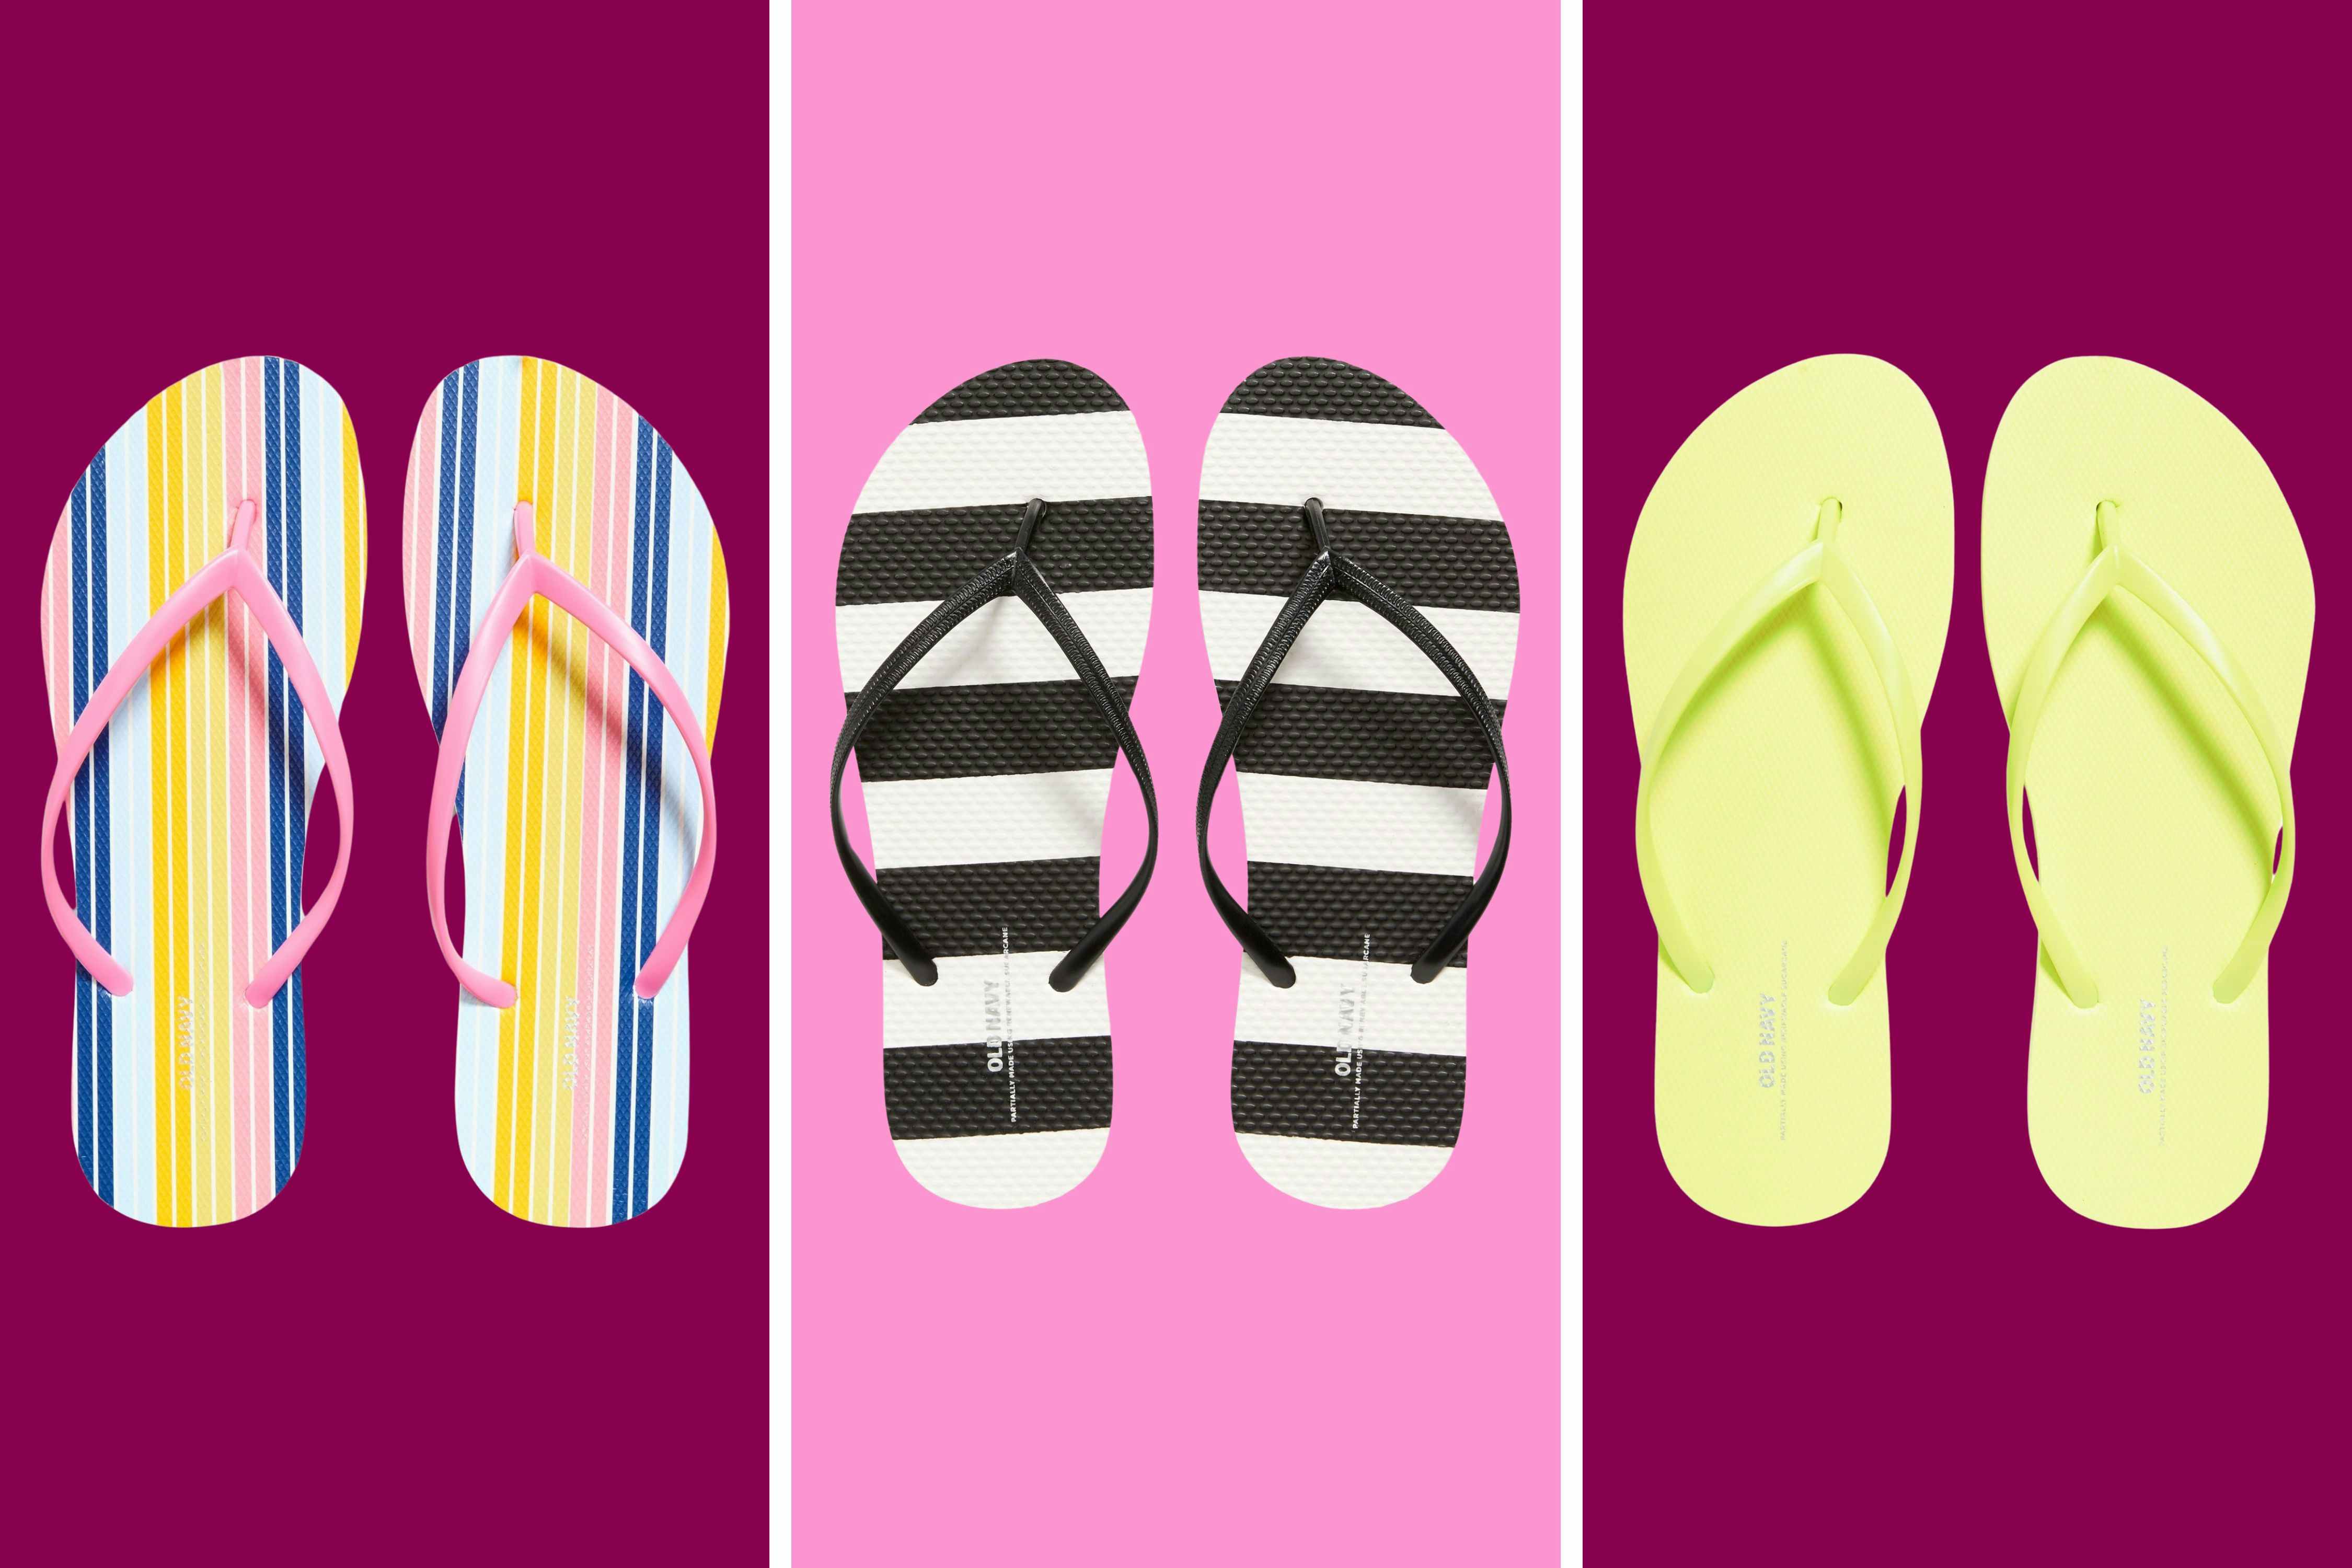 Get Adult Flip-Flops for as Low as $3.49 at Old Navy